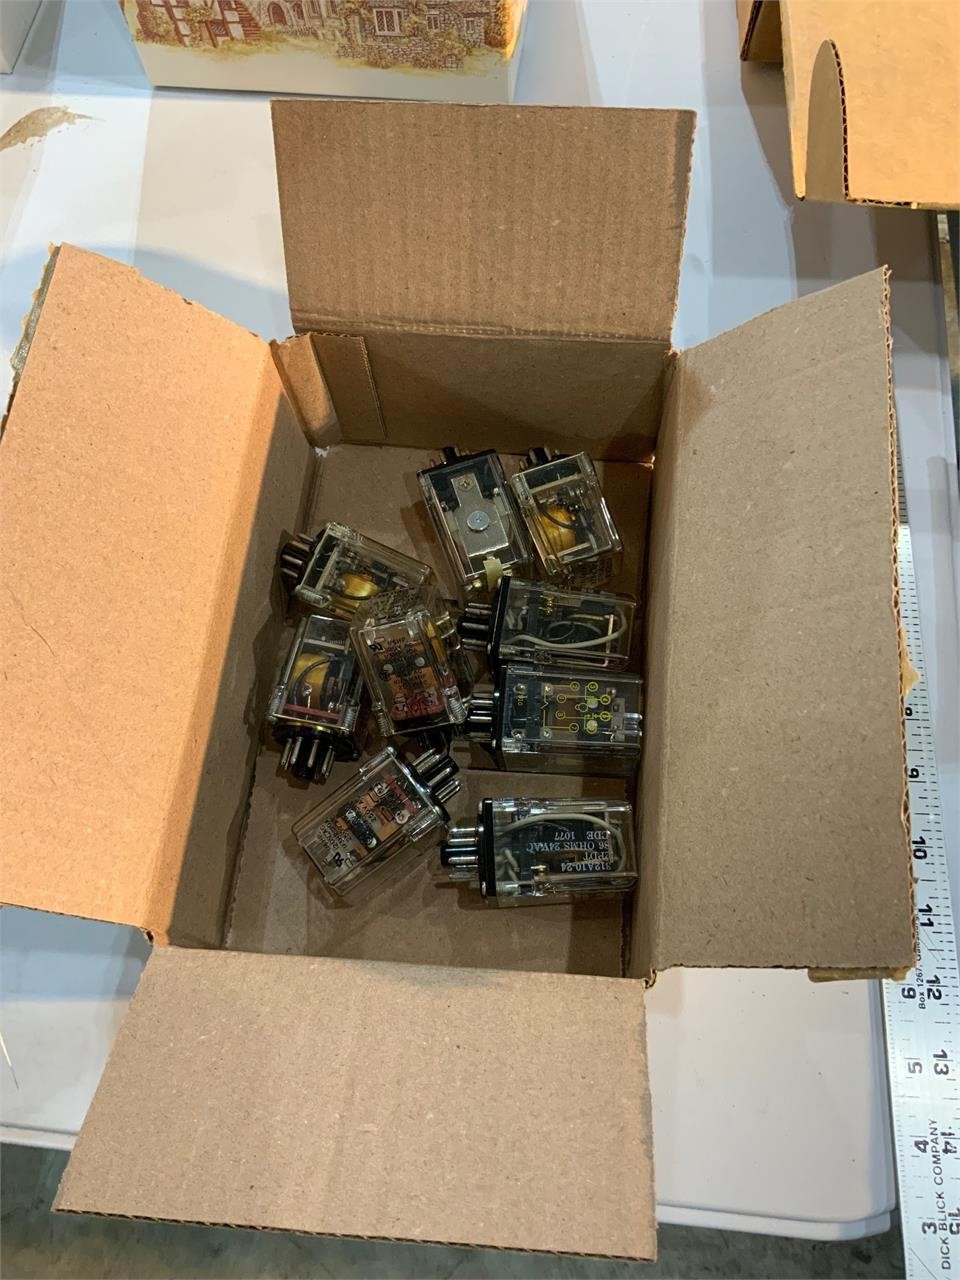 box of some form of transistors?